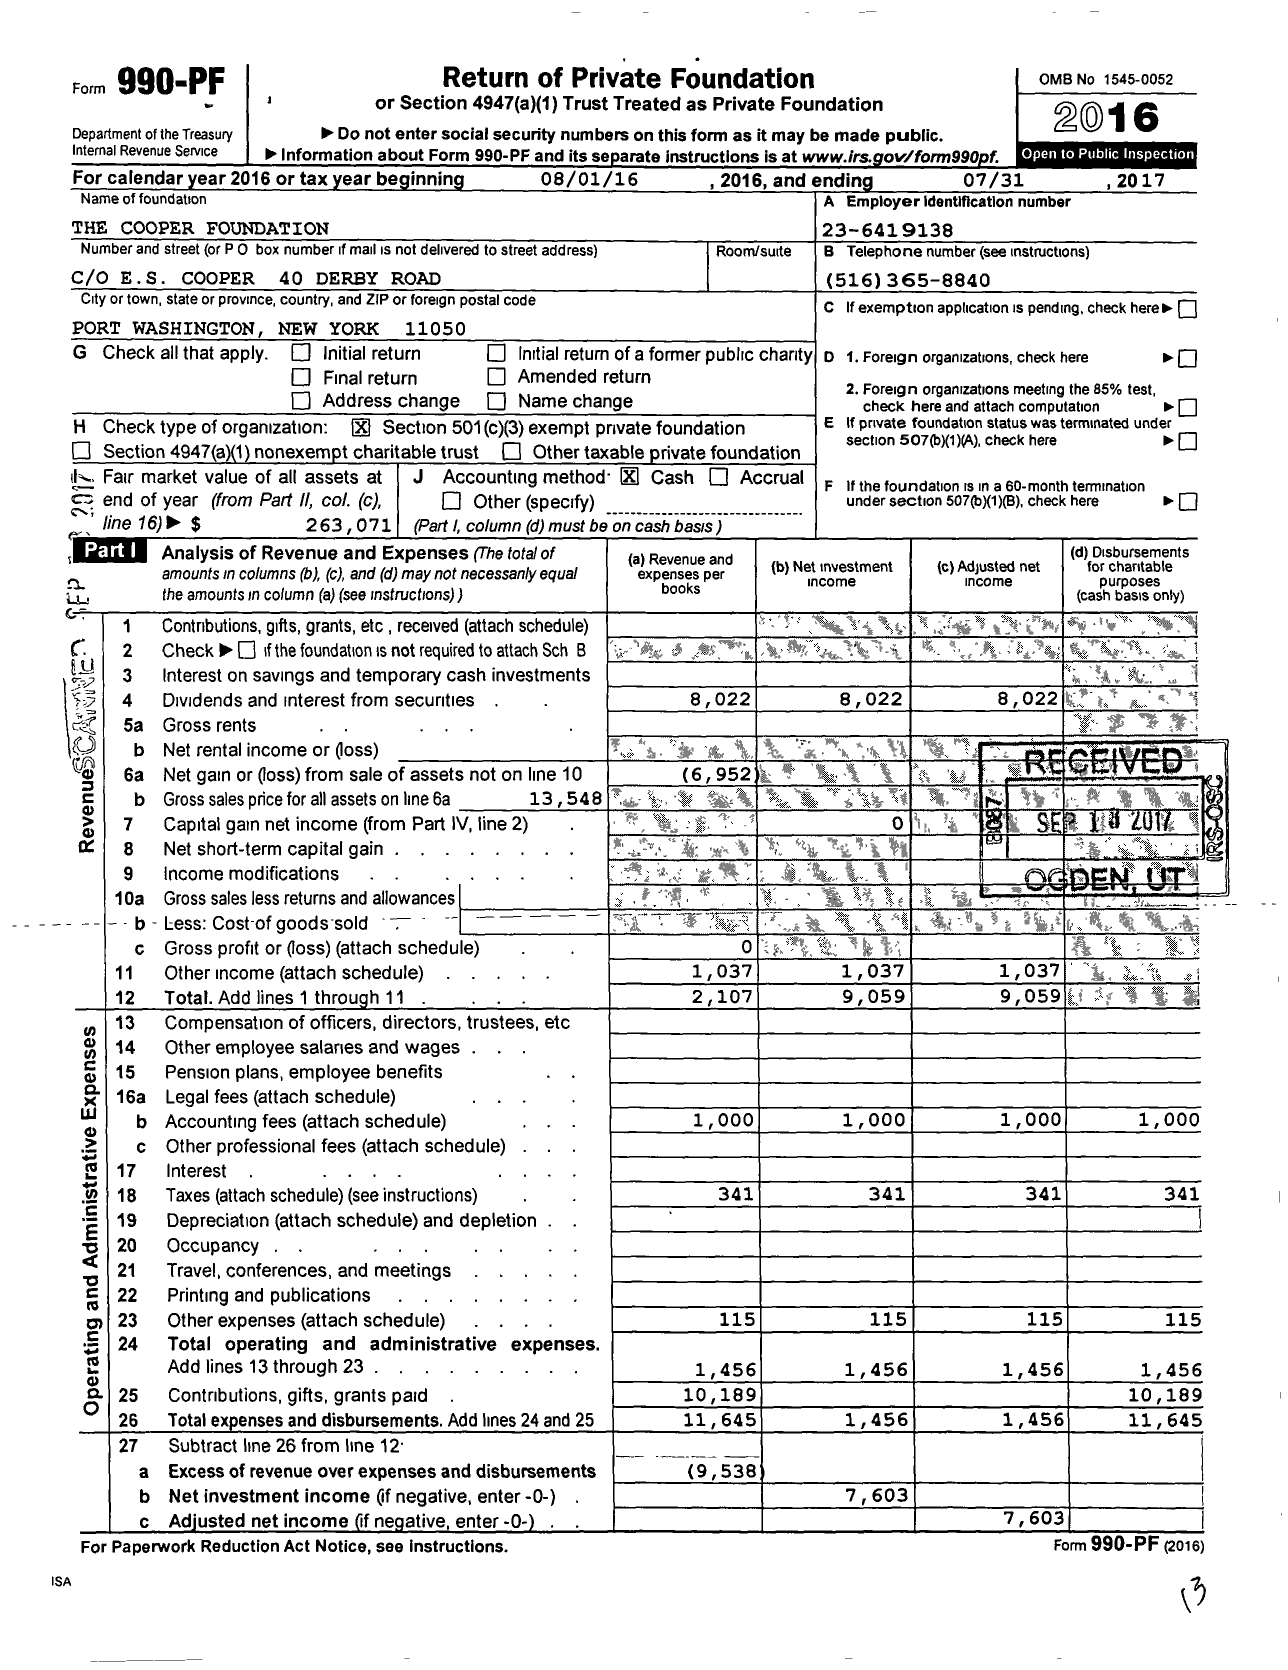 Image of first page of 2016 Form 990PF for The Cooper Foundation